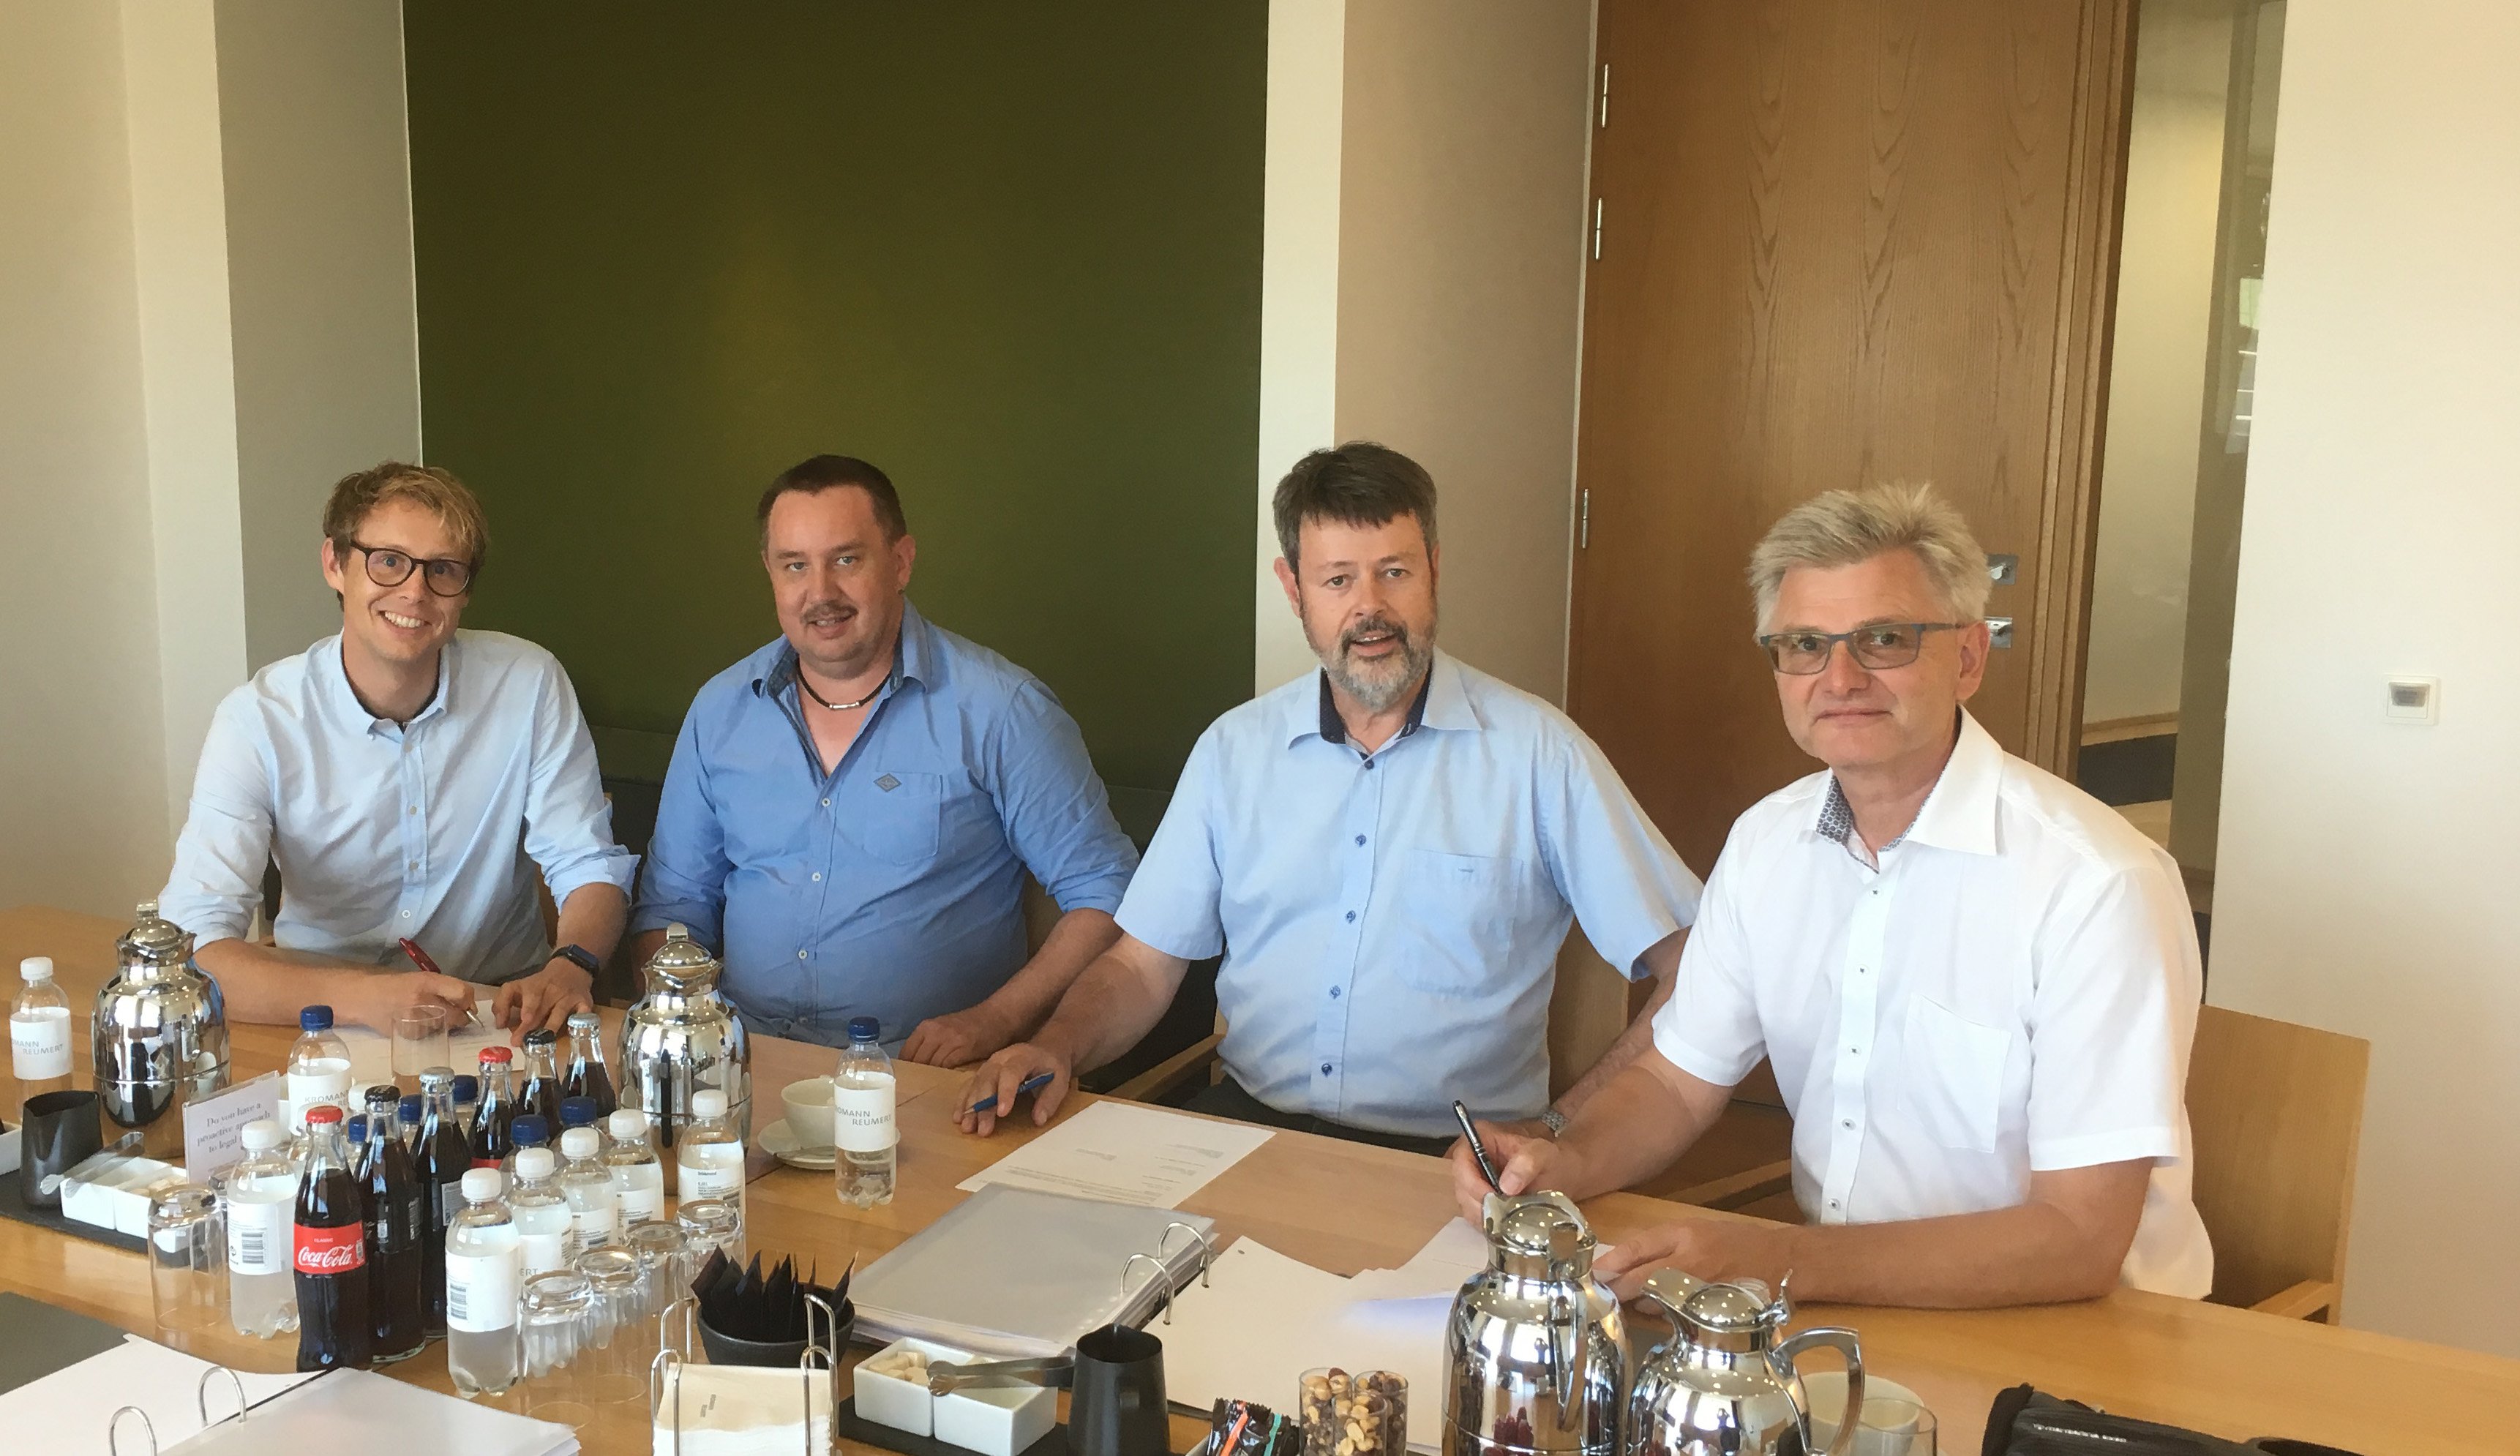 From left to right: Roland Ruf and Wolfgang Ruf, co-owners and managing directors of Ruf briquetting systems, signed the acquisition agreement along with Mogens S. Knudsen und Henning M. Larsen, the previous owners of C. F. Nielsen. All of them are happy about the fact that two companies, which share the same philosophy and values, are under one roof now. (Foto: Ruf)